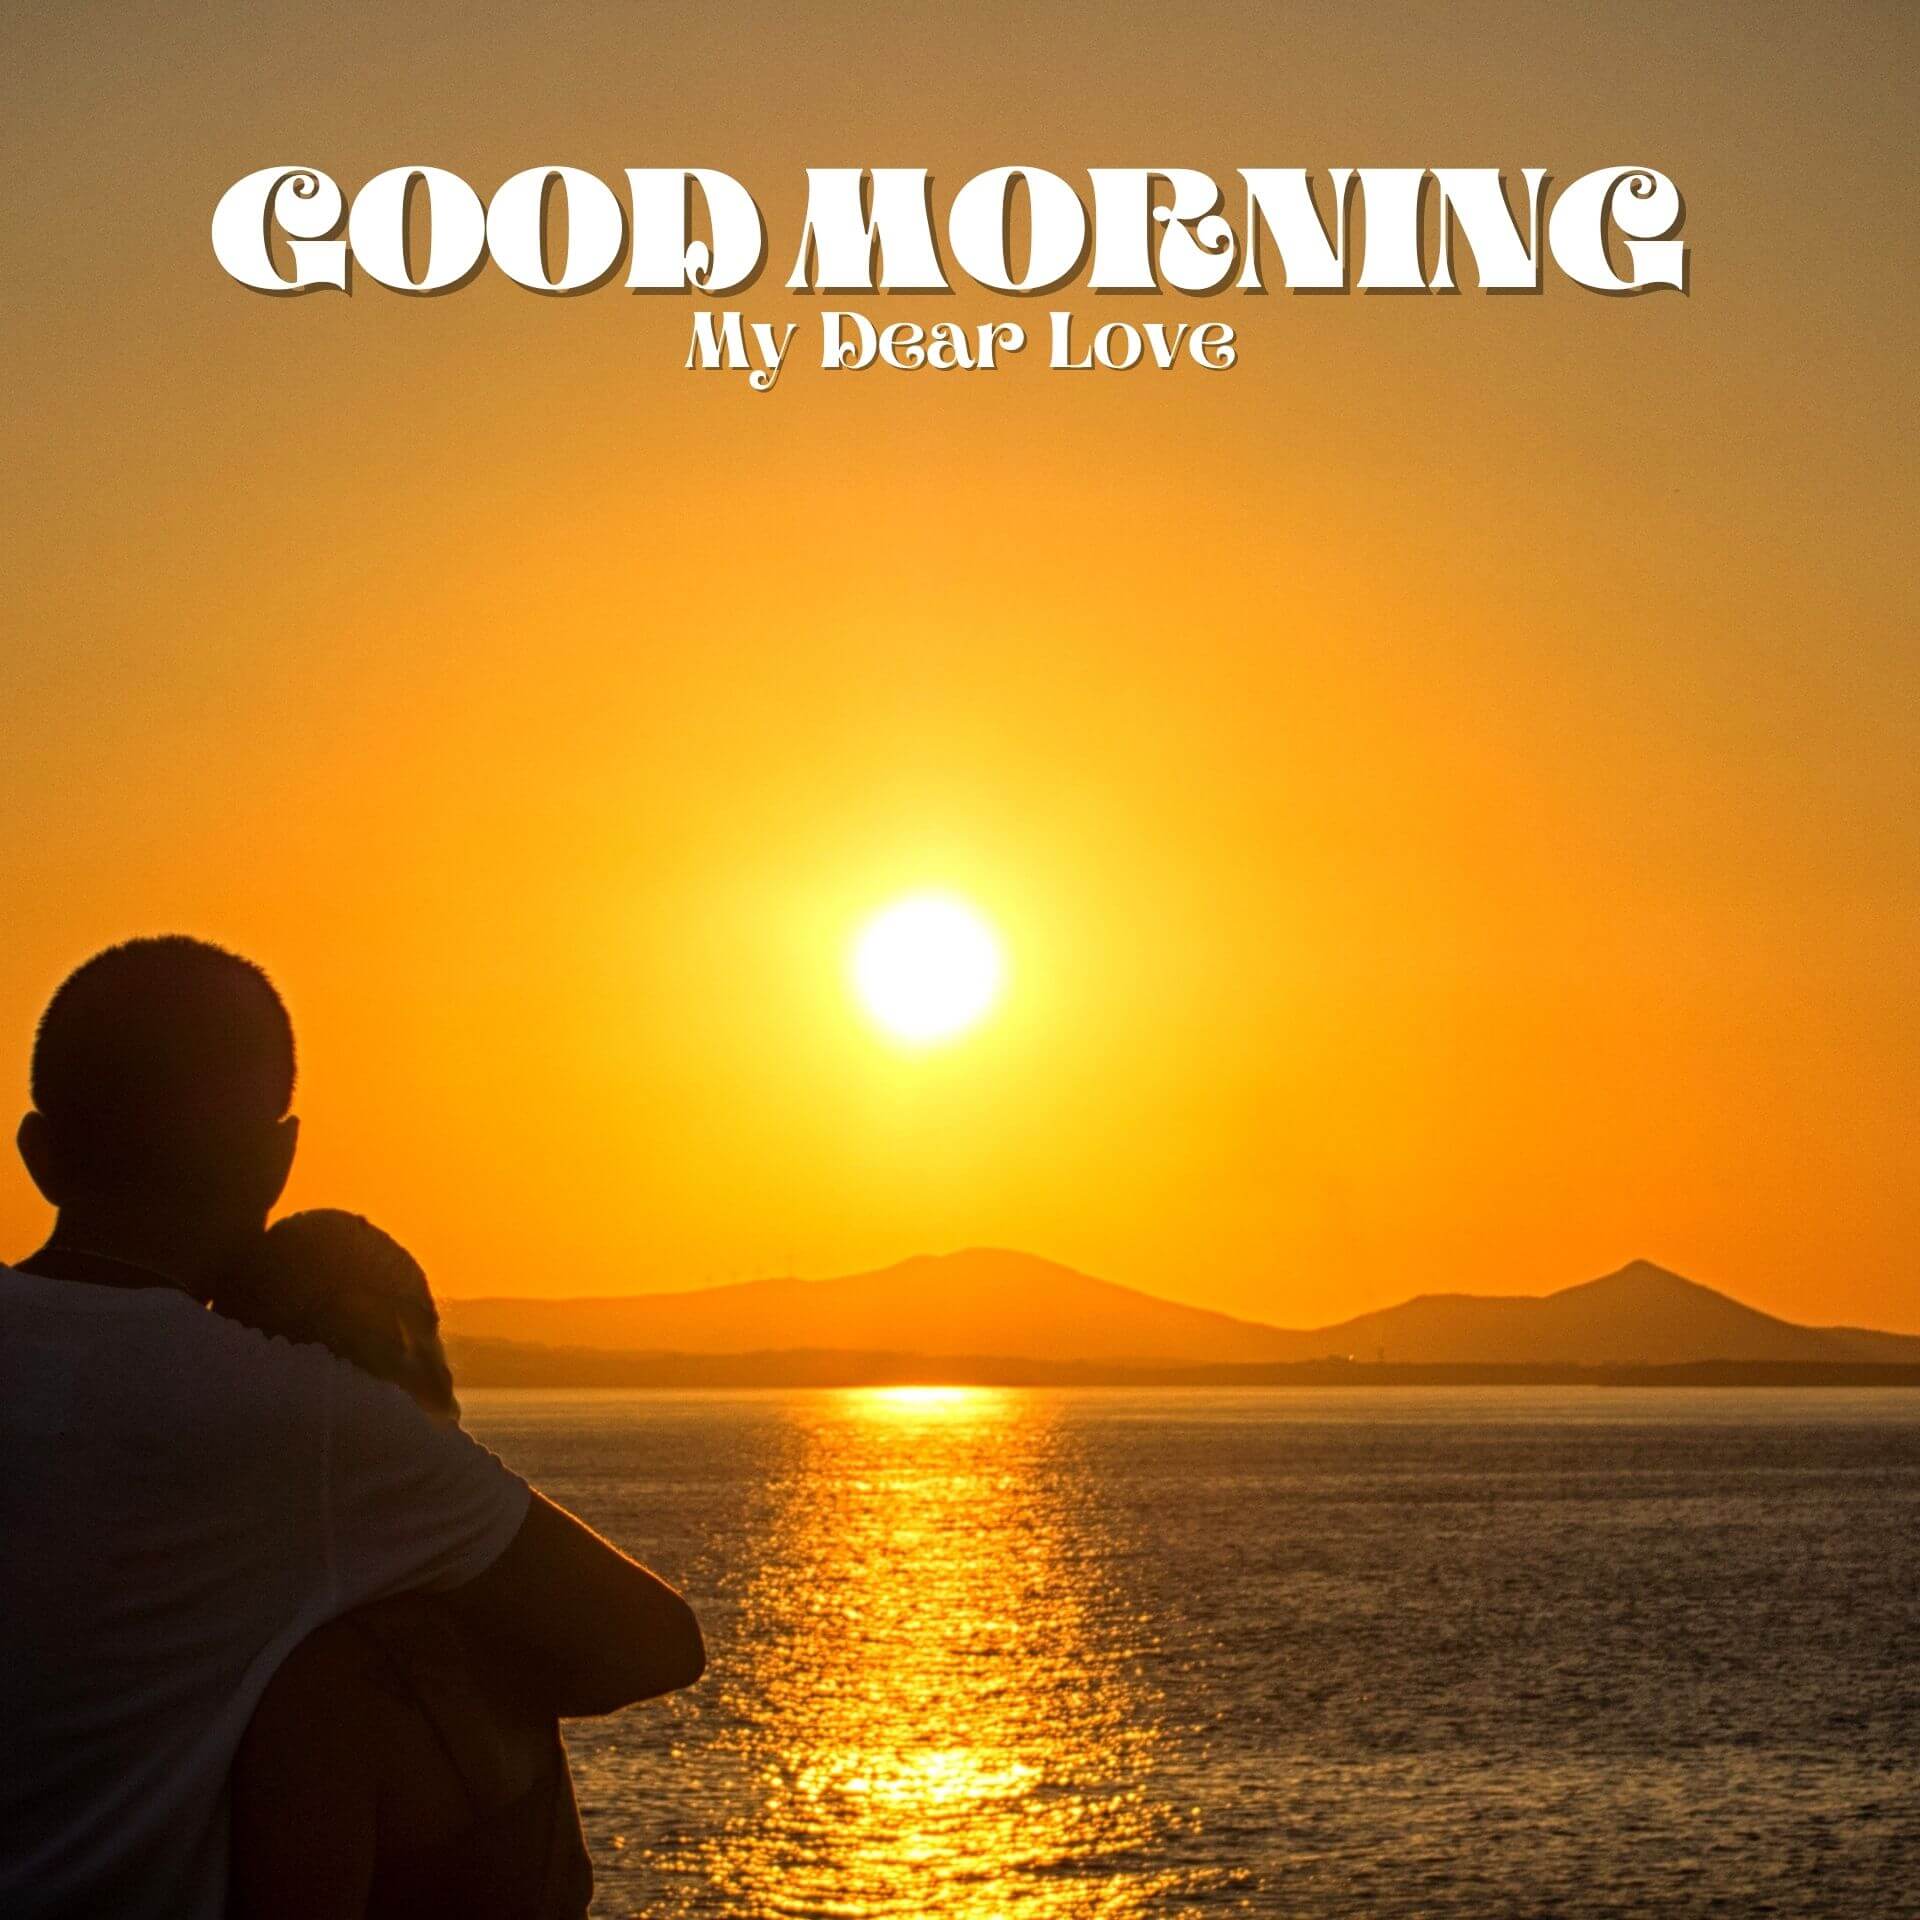 Couple Sunrise Romantic Good Morning Images Download